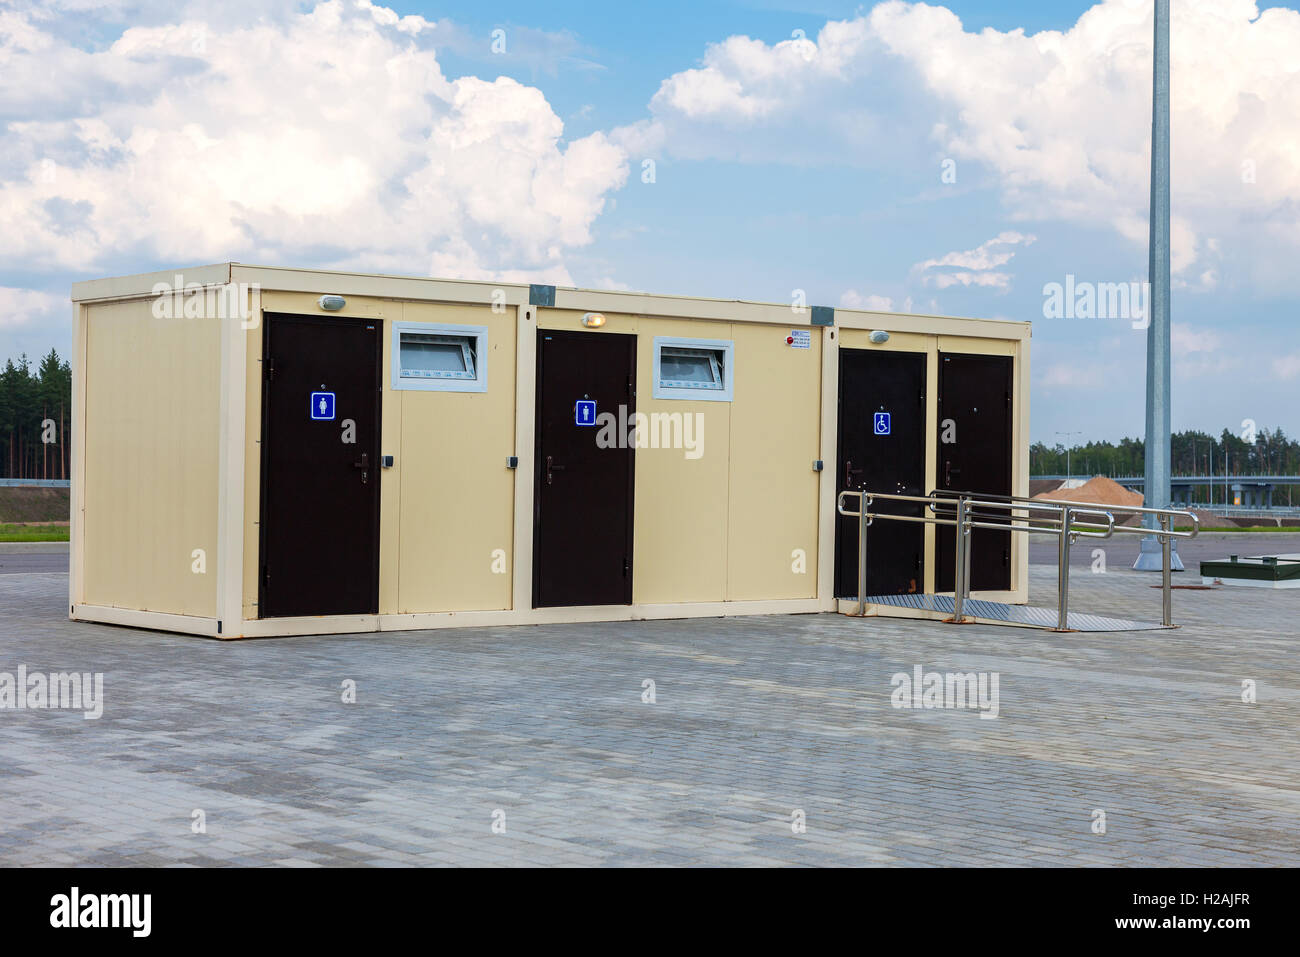 New modular public toilet stand on the pavement Stock Photo